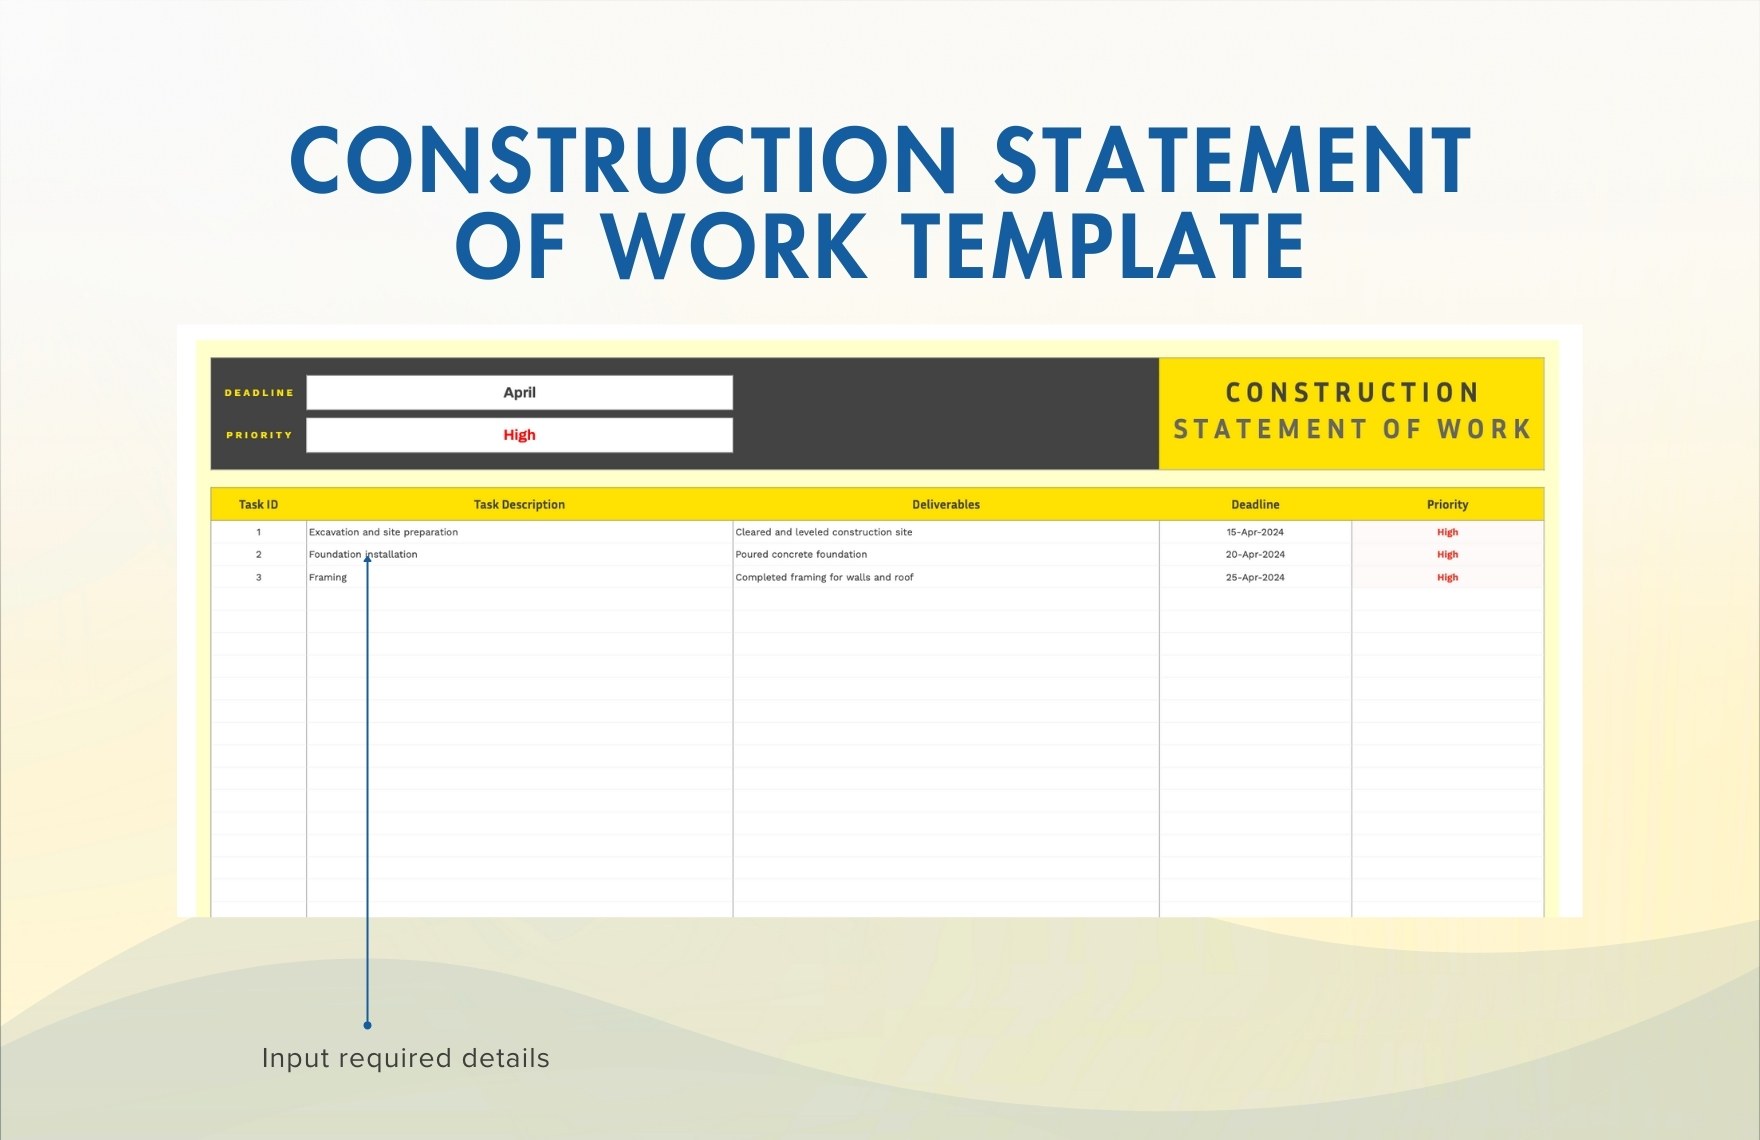 Construction Statement of Work Template